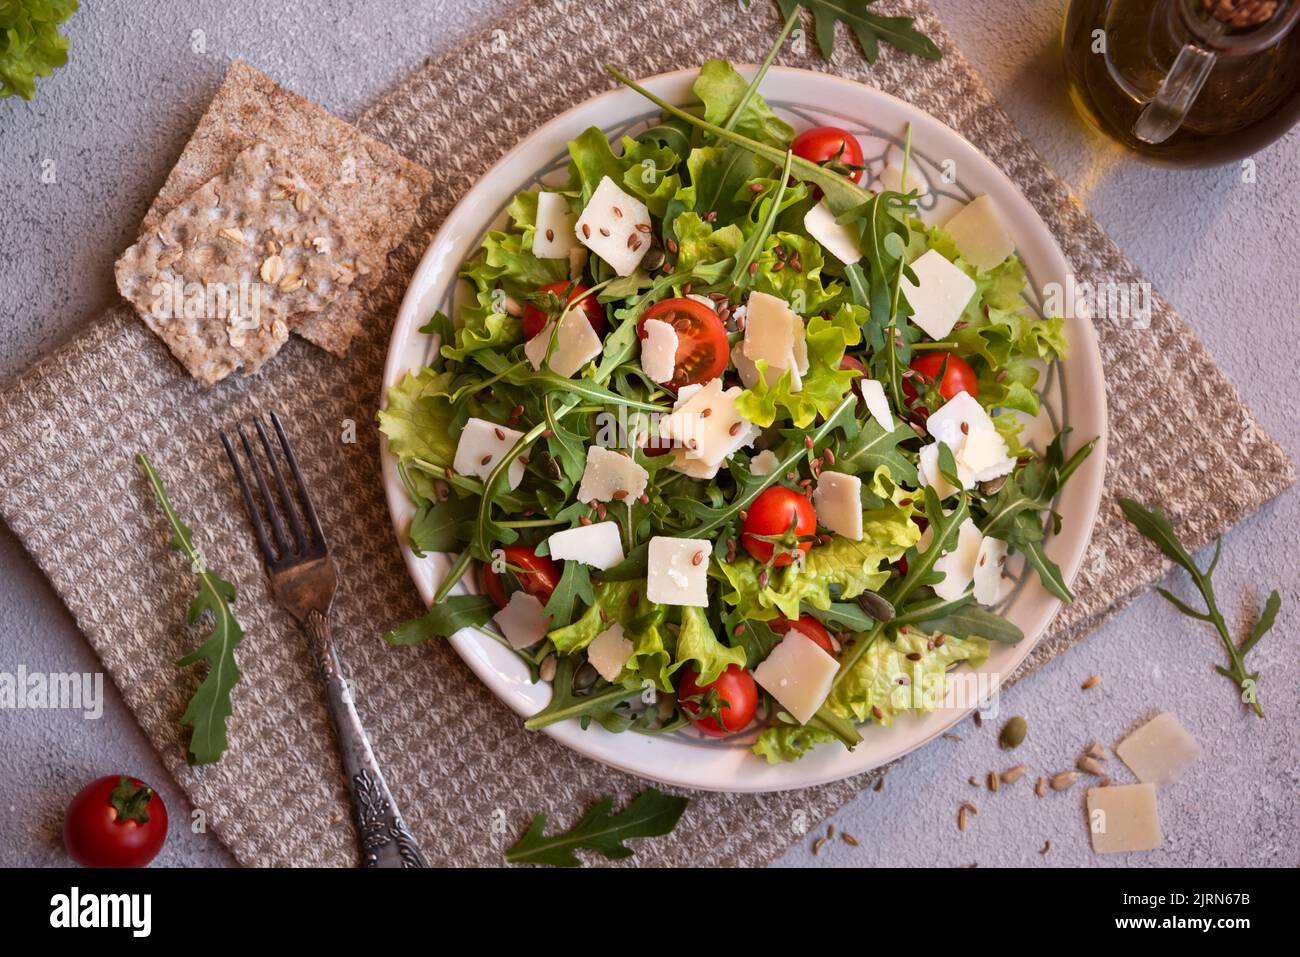 Fresh vegetables salad with tomatoes, arugola, parmesan cheese and other ingredients, healthy food Stock Photo